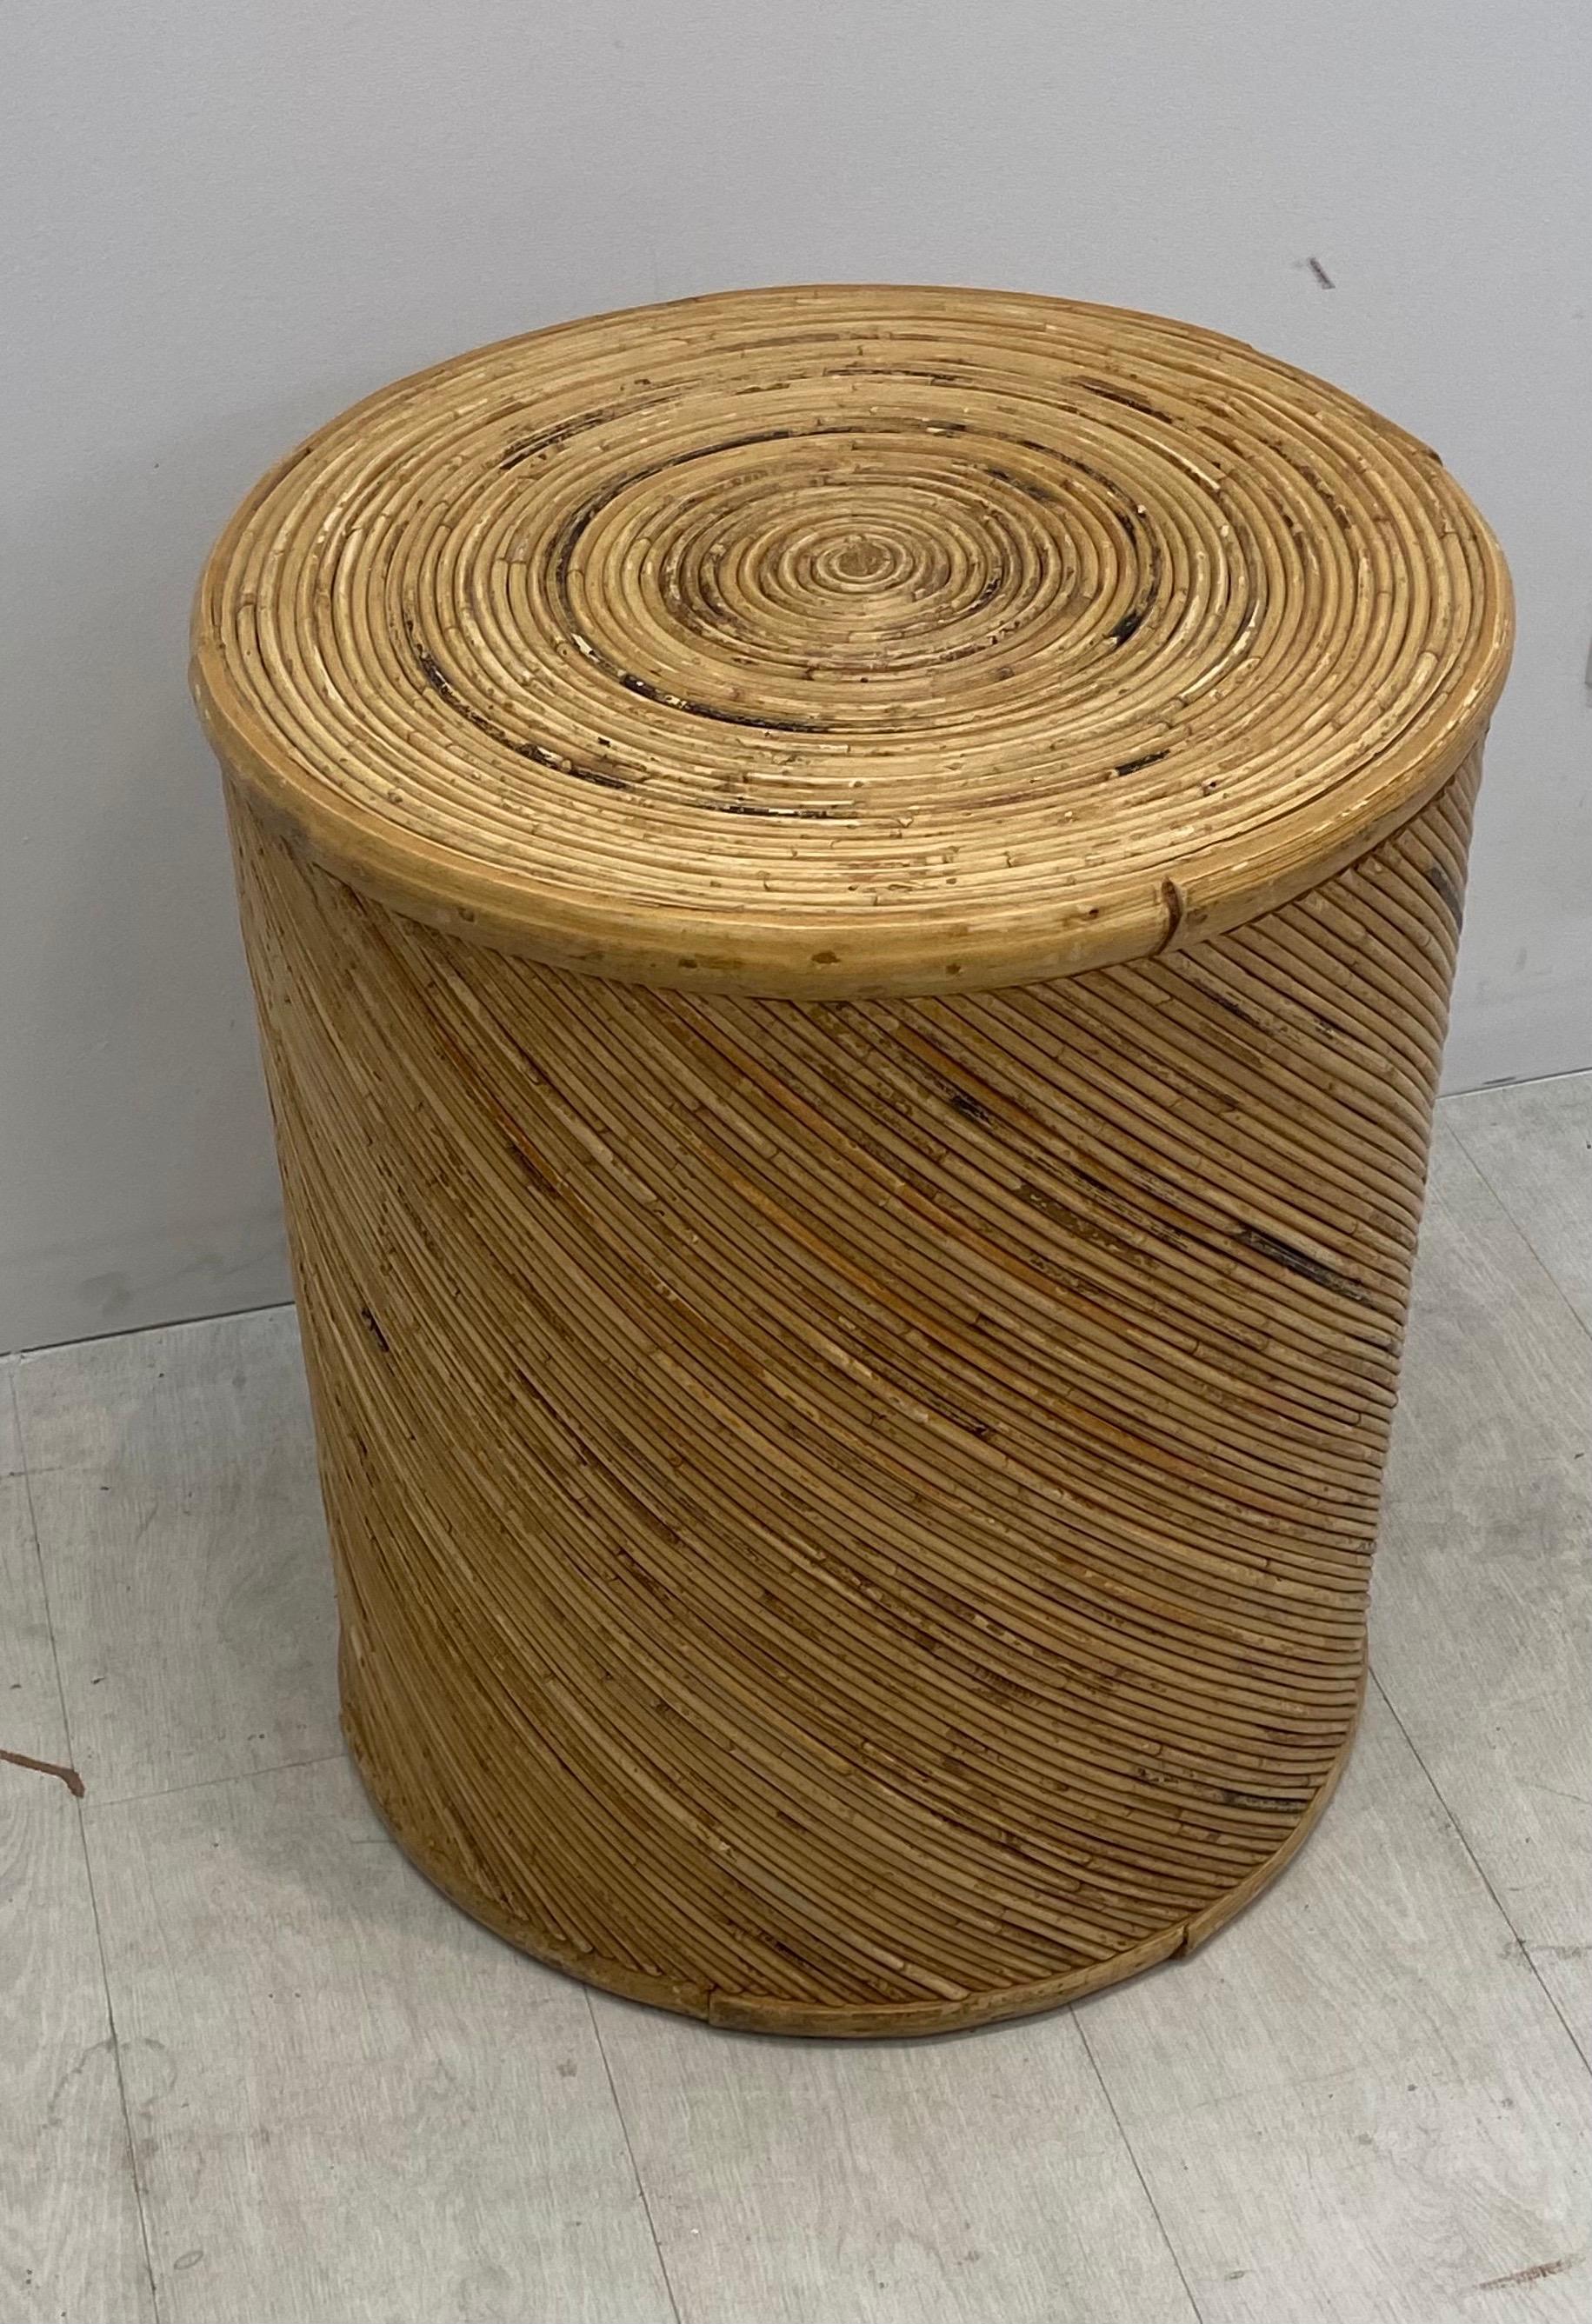 High quality pencil reed round side table made in the Philippines by Maitland Smith.